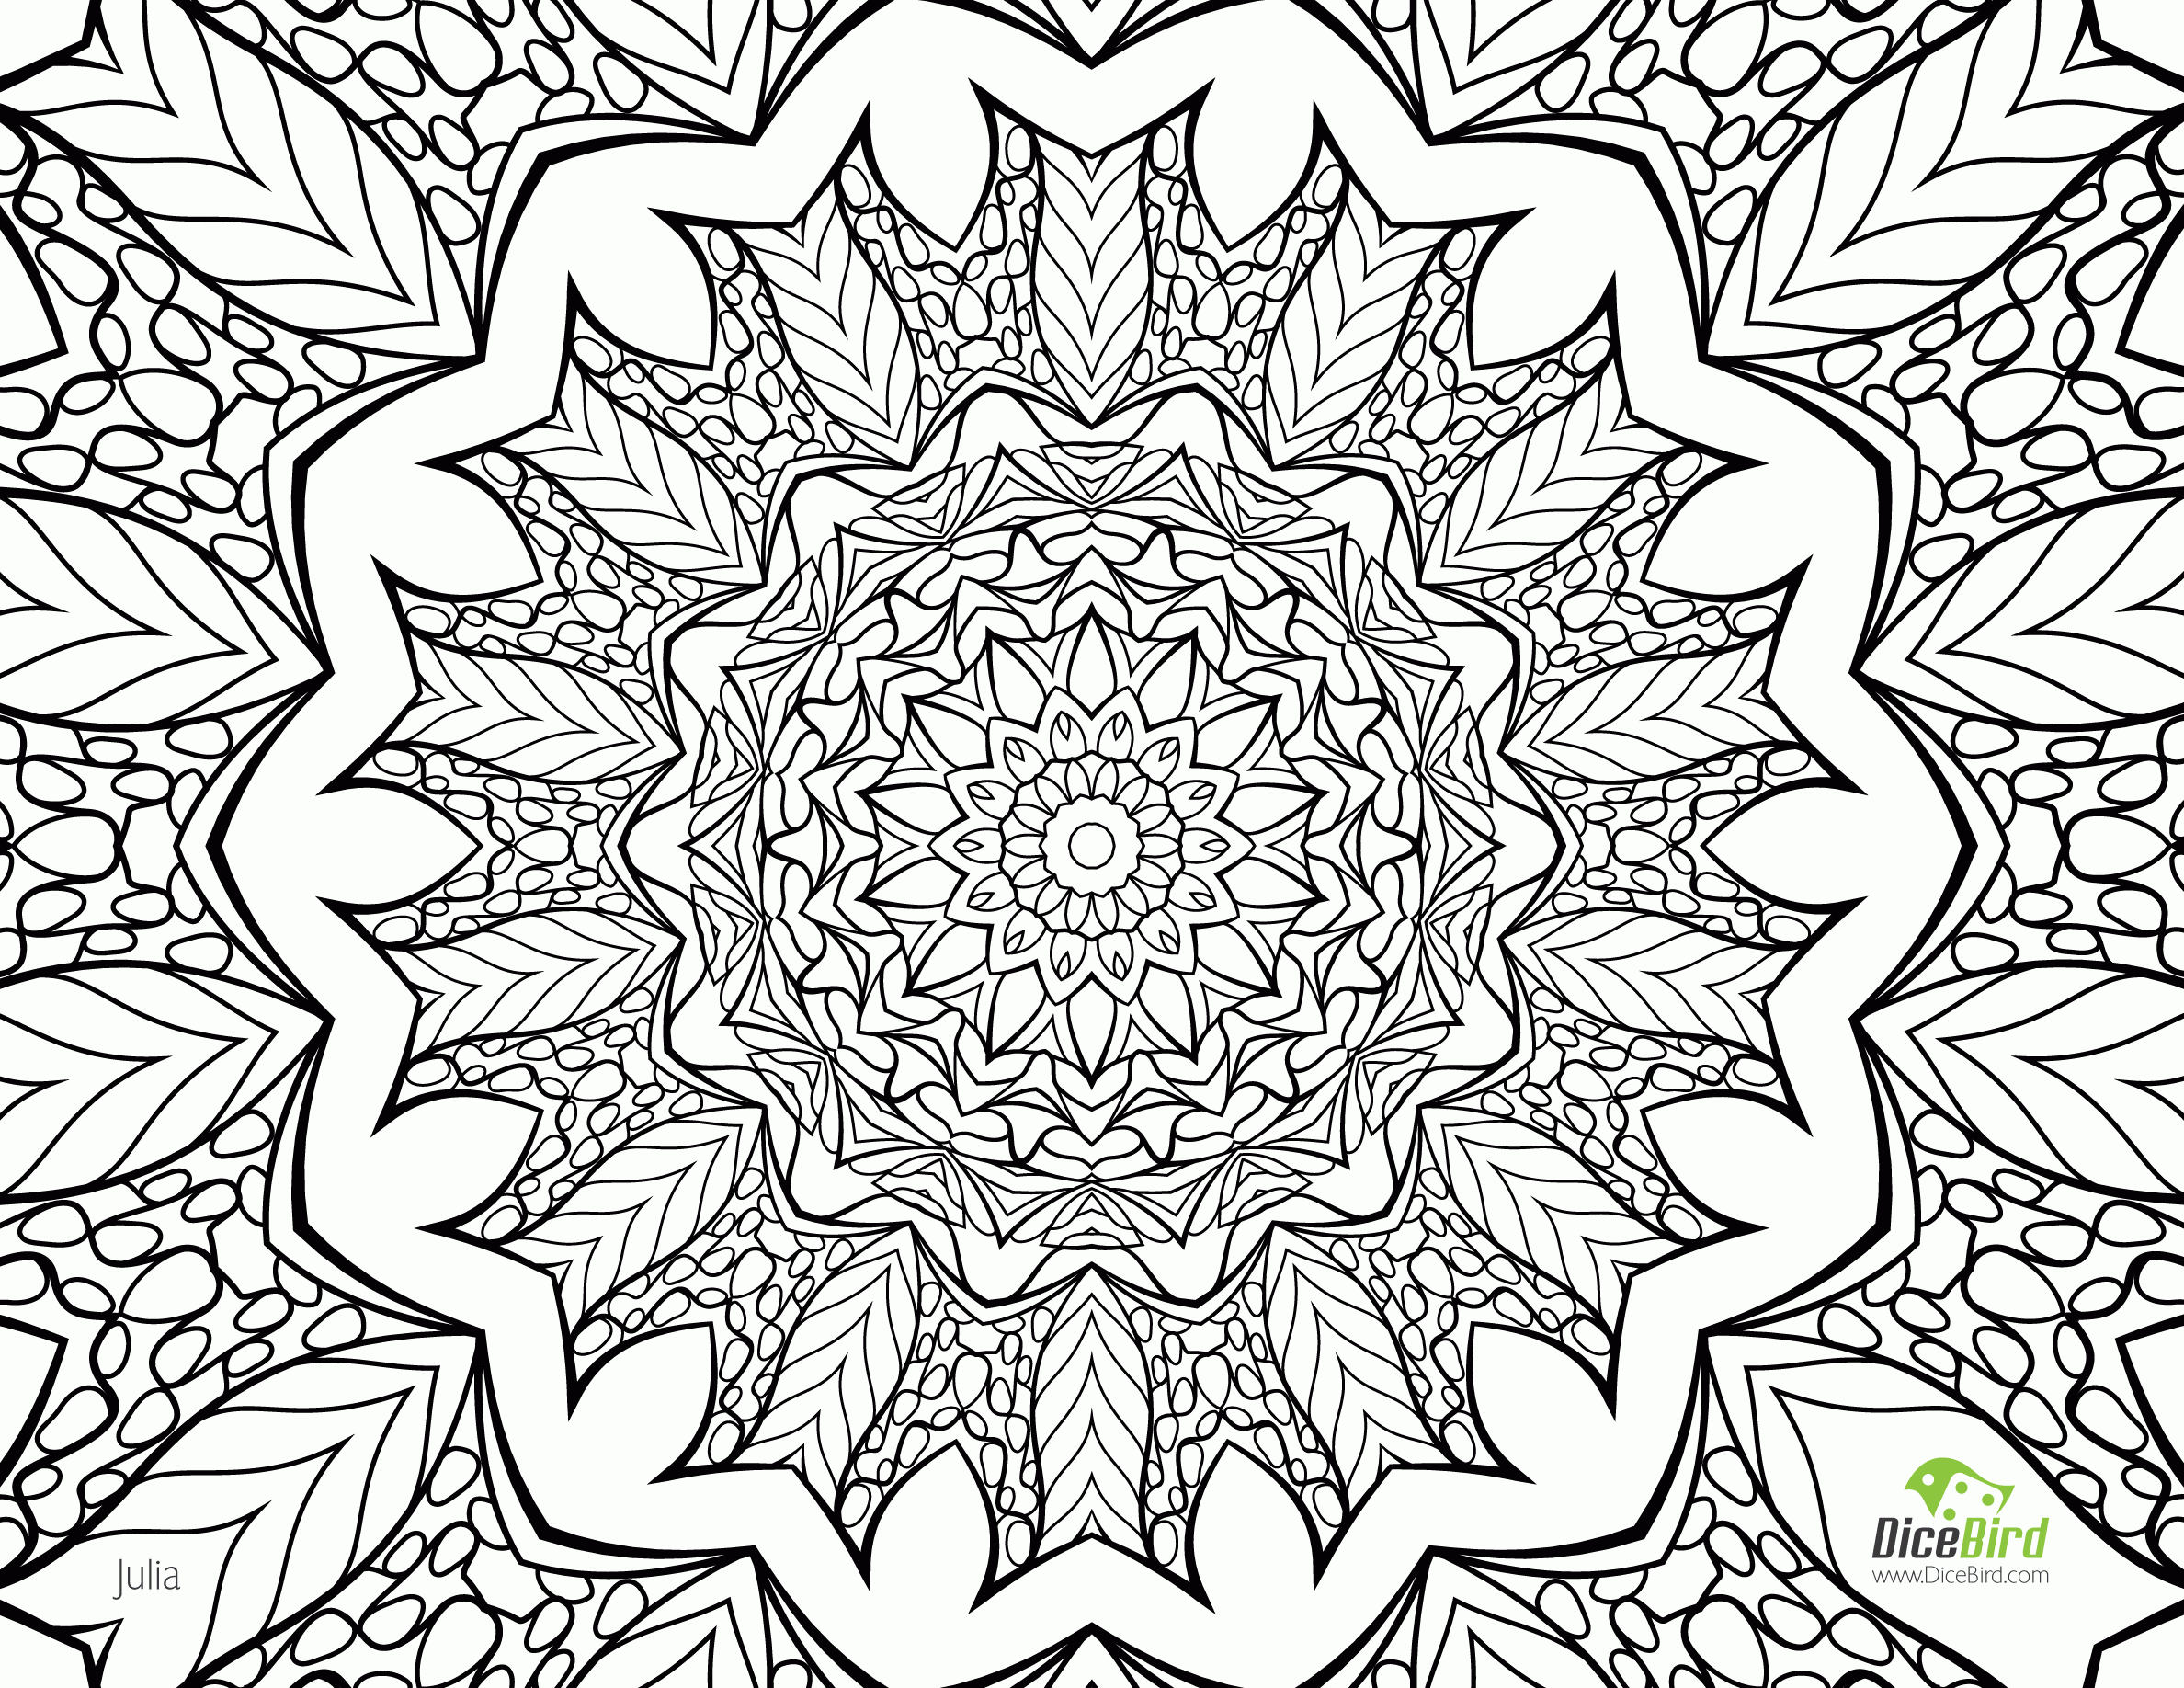 free-coloring-pages-for-adults-with-dementia-101-coloring-pages